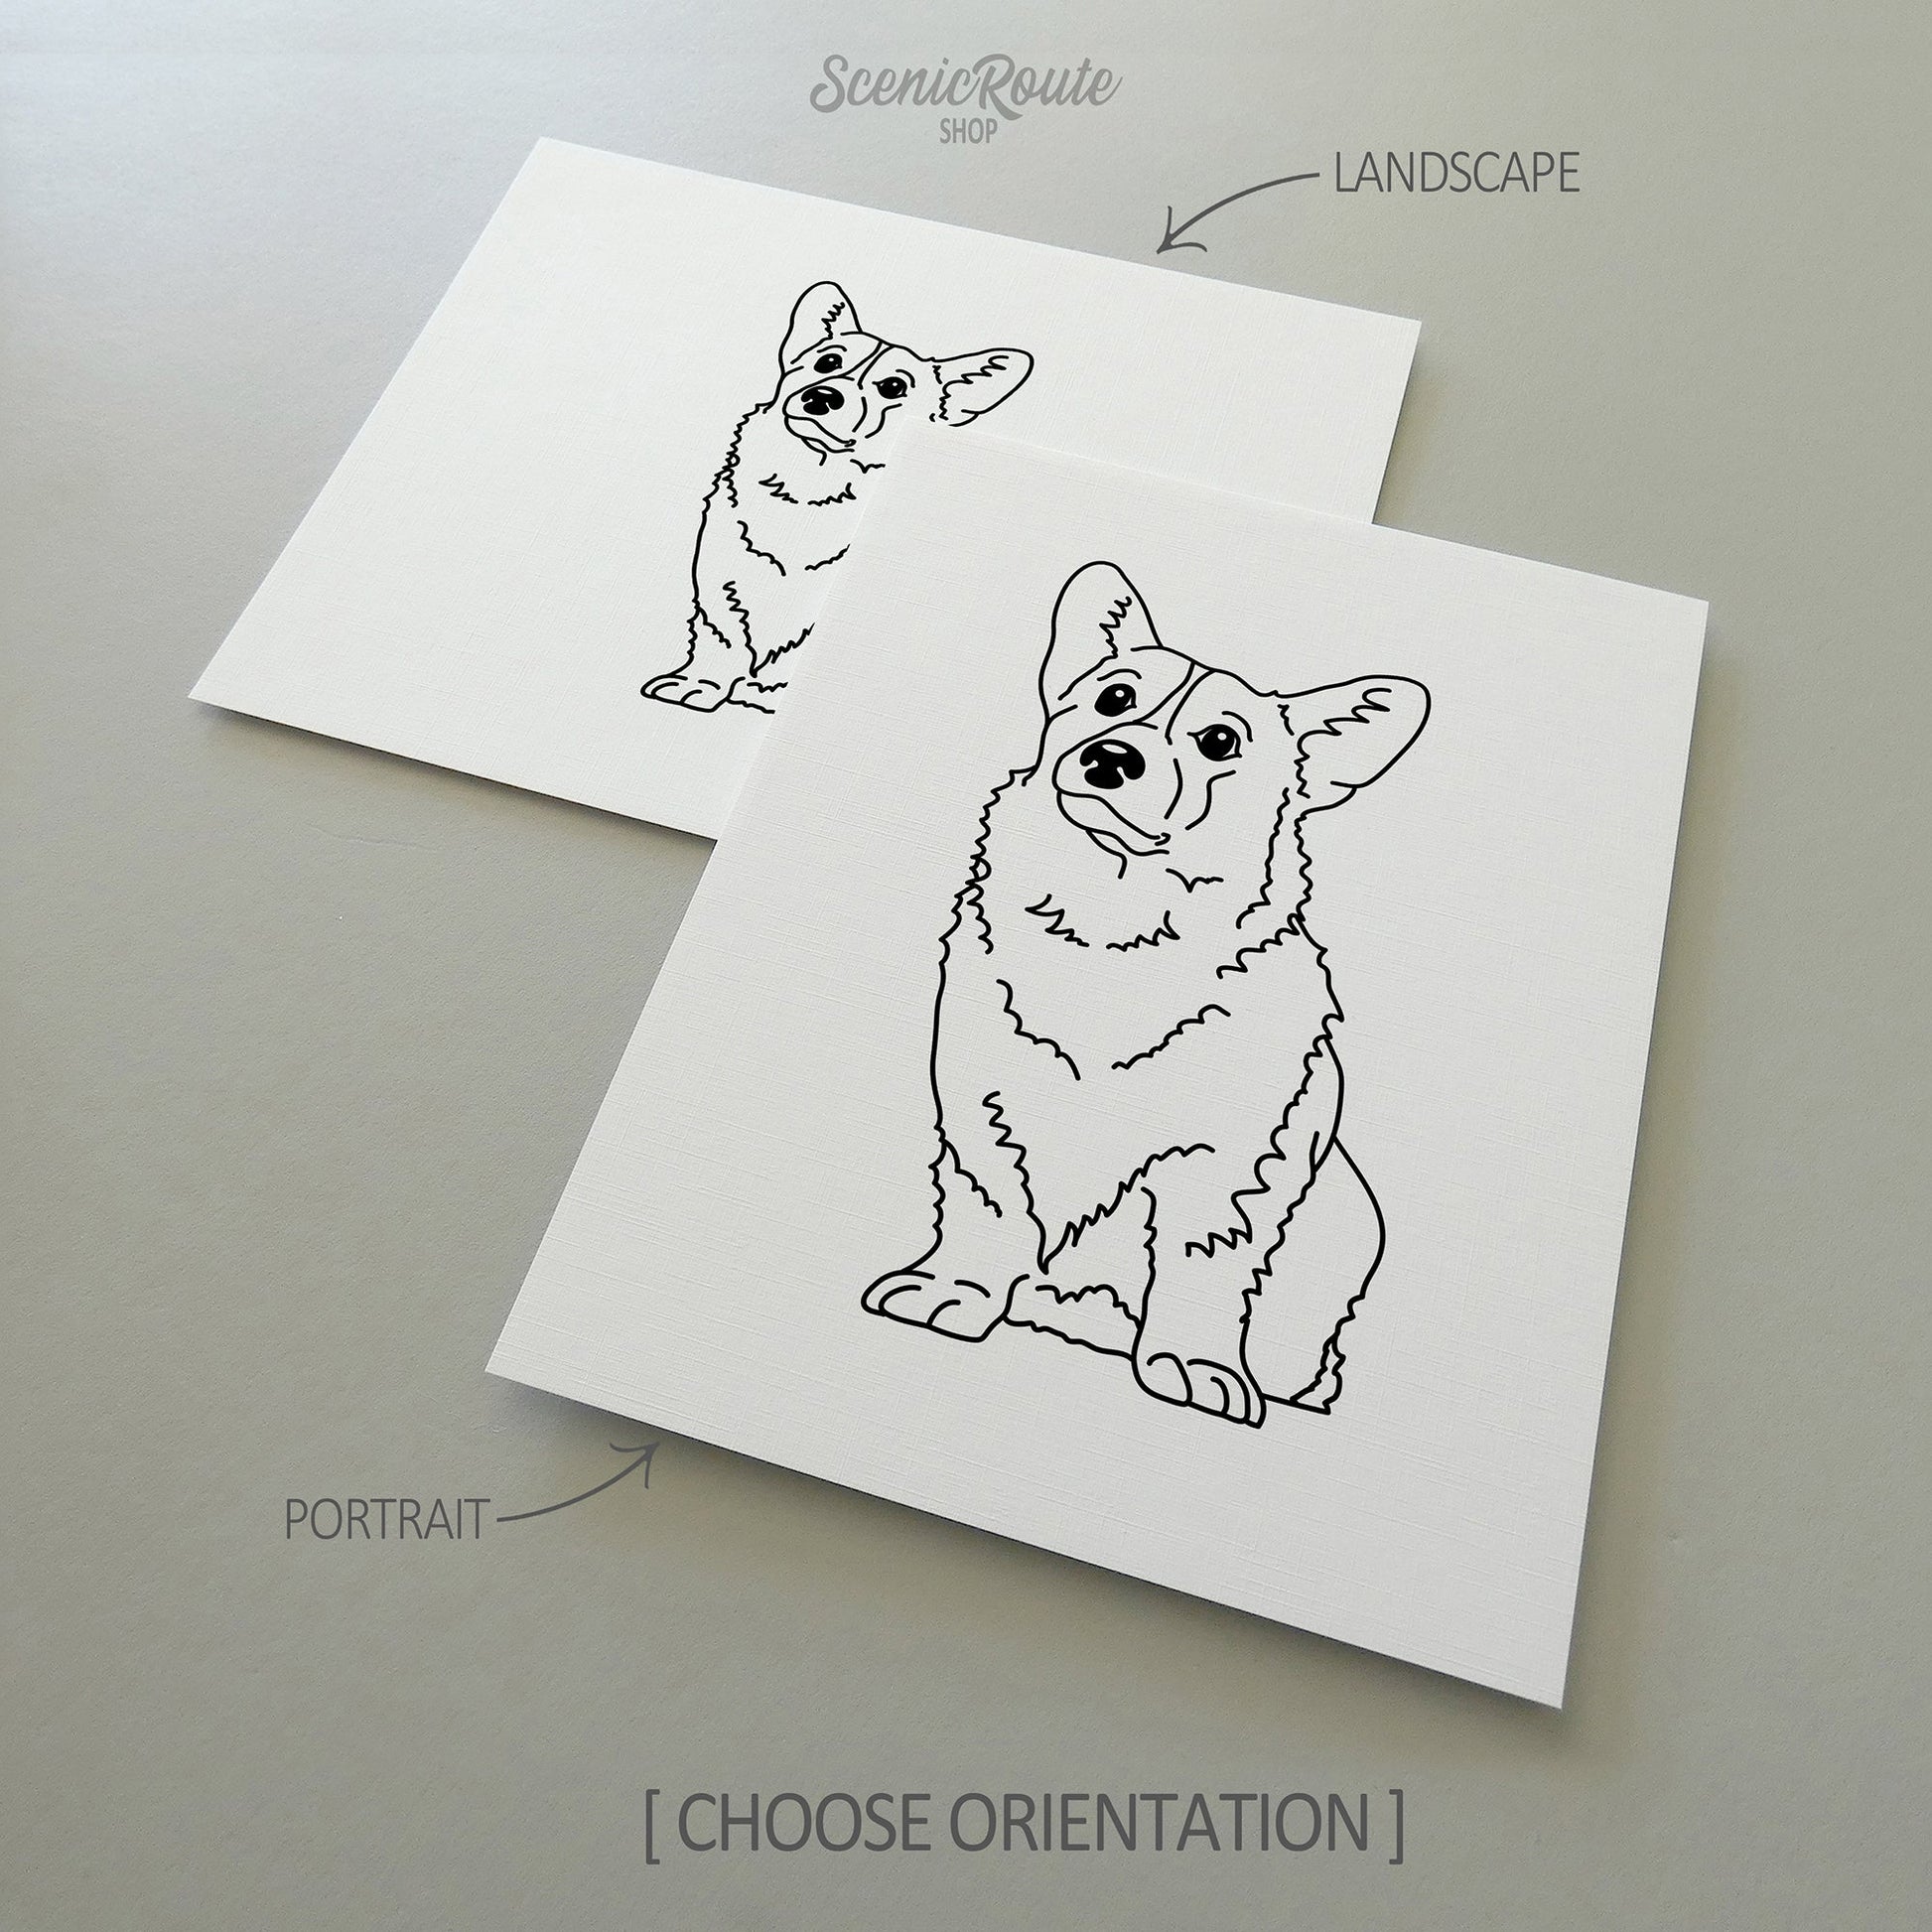 Two drawings of a Corgi dog on white linen paper with a gray background.  Pieces are shown in portrait and landscape orientation options to illustrate the available art print options.